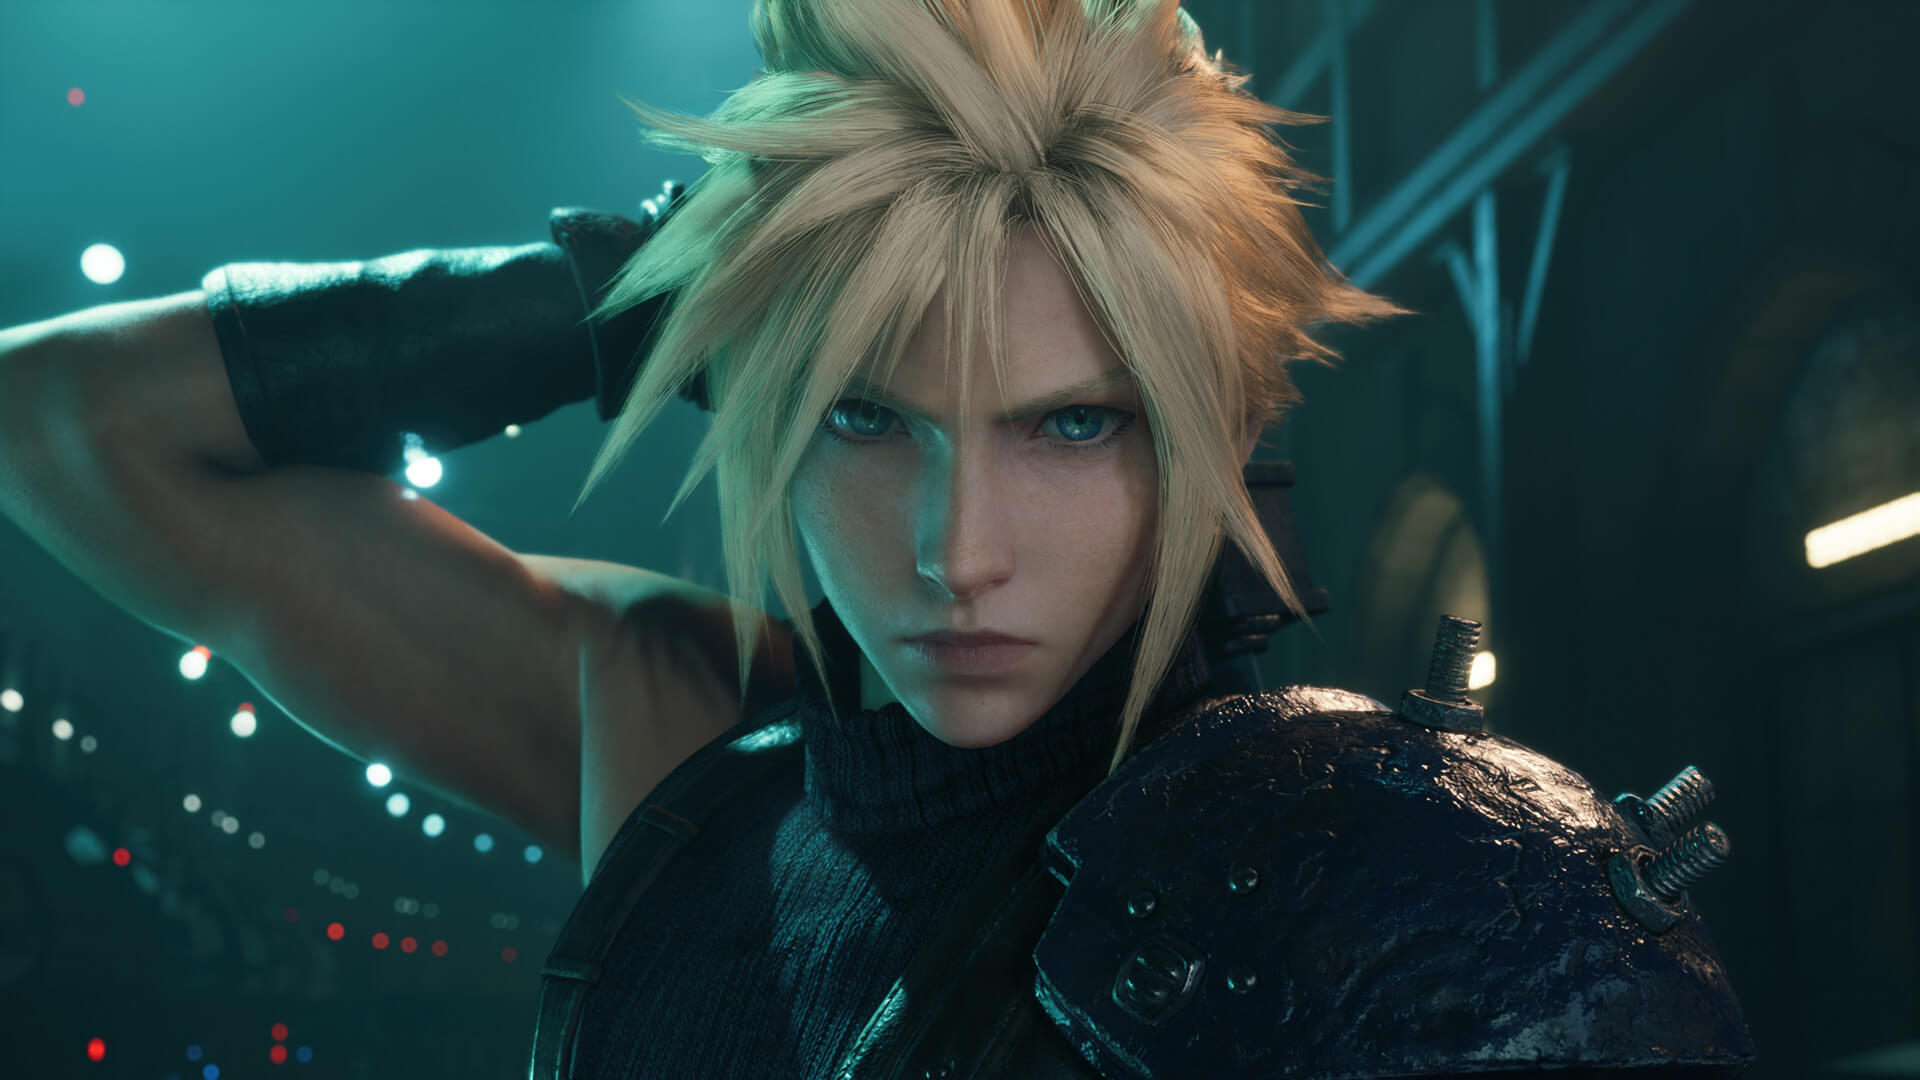 Cloud stares at the camera in Final Fantasy VII Remake